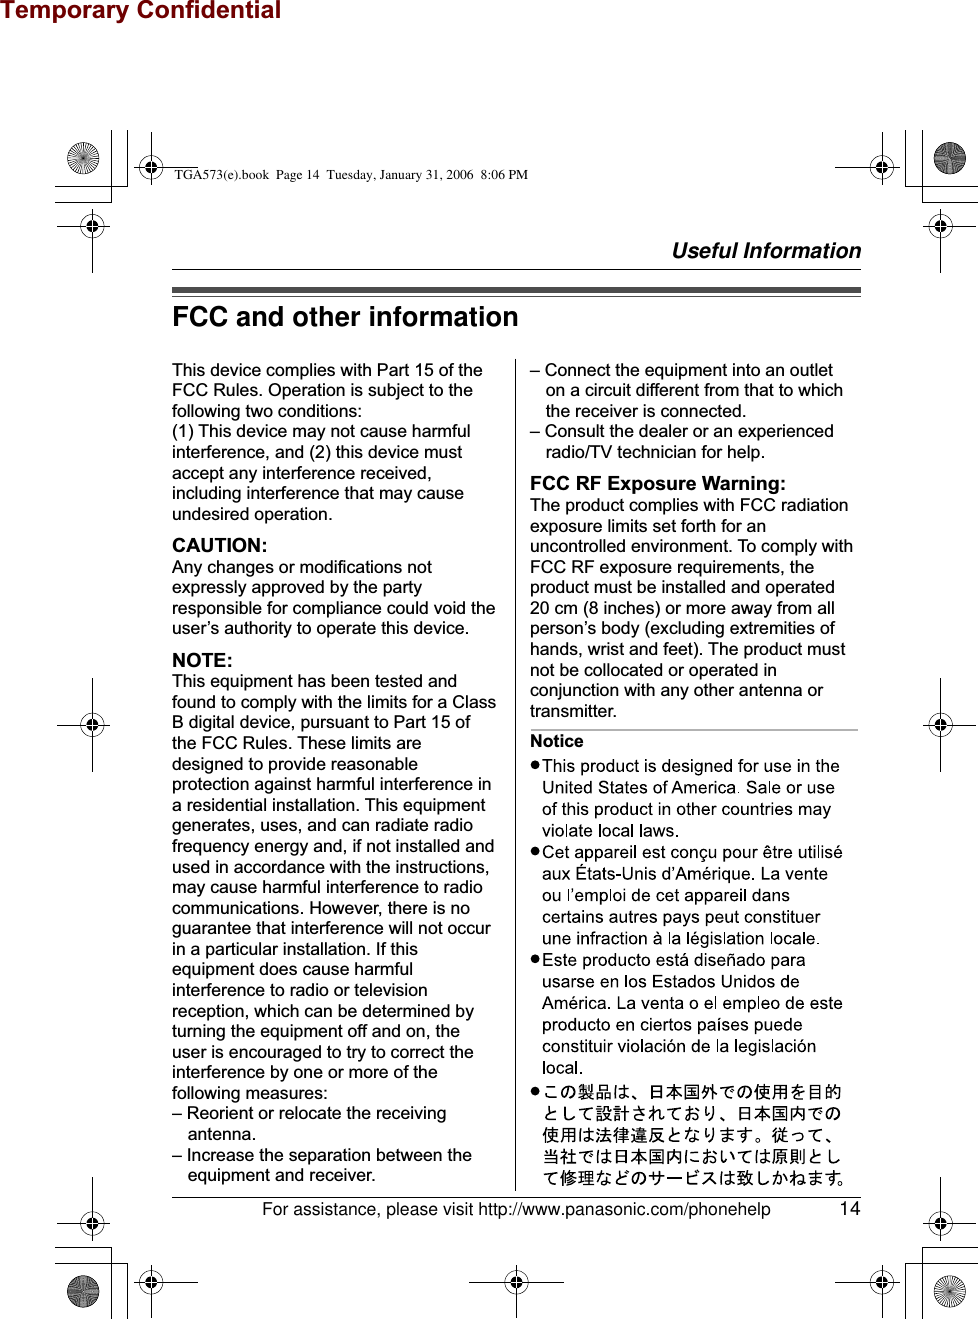 Temporary ConfidentialUseful InformationFor assistance, please visit http://www.panasonic.com/phonehelp 14FCC and other informationThis device complies with Part 15 of the FCC Rules. Operation is subject to the following two conditions:(1) This device may not cause harmful interference, and (2) this device must accept any interference received, including interference that may cause undesired operation.CAUTION:Any changes or modifications not expressly approved by the party responsible for compliance could void the user’s authority to operate this device.NOTE:This equipment has been tested and found to comply with the limits for a Class B digital device, pursuant to Part 15 of the FCC Rules. These limits are designed to provide reasonable protection against harmful interference in a residential installation. This equipment generates, uses, and can radiate radio frequency energy and, if not installed and used in accordance with the instructions, may cause harmful interference to radio communications. However, there is no guarantee that interference will not occur in a particular installation. If this equipment does cause harmful interference to radio or television reception, which can be determined by turning the equipment off and on, the user is encouraged to try to correct the interference by one or more of the following measures:– Reorient or relocate the receiving antenna.– Increase the separation between the equipment and receiver.– Connect the equipment into an outlet on a circuit different from that to which the receiver is connected.– Consult the dealer or an experienced radio/TV technician for help.FCC RF Exposure Warning:The product complies with FCC radiation exposure limits set forth for an uncontrolled environment. To comply with FCC RF exposure requirements, the product must be installed and operated 20 cm (8 inches) or more away from all person’s body (excluding extremities of hands, wrist and feet). The product must not be collocated or operated in conjunction with any other antenna or transmitter.NoticeTGA573(e).book  Page 14  Tuesday, January 31, 2006  8:06 PM